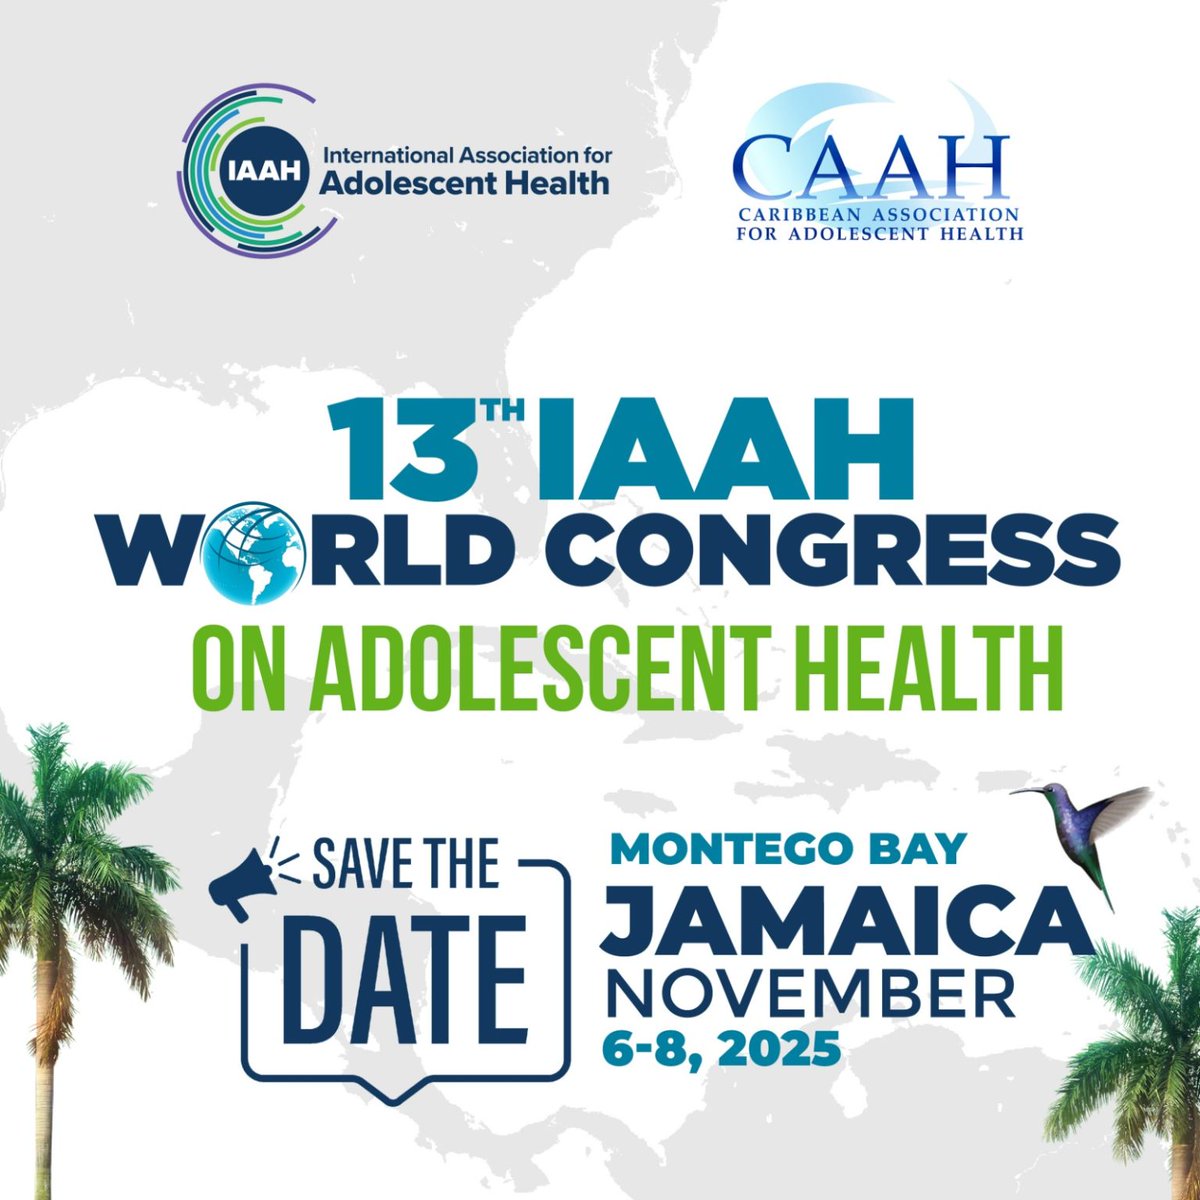 ⚠ Save the Date 📢 In partnership with the Caribbean Association for Adolescent Health, the IAAH 13th World Congress on #AdolescentHealth will be held in in Montego Bay, Jamaica on November 6-8, 2025.